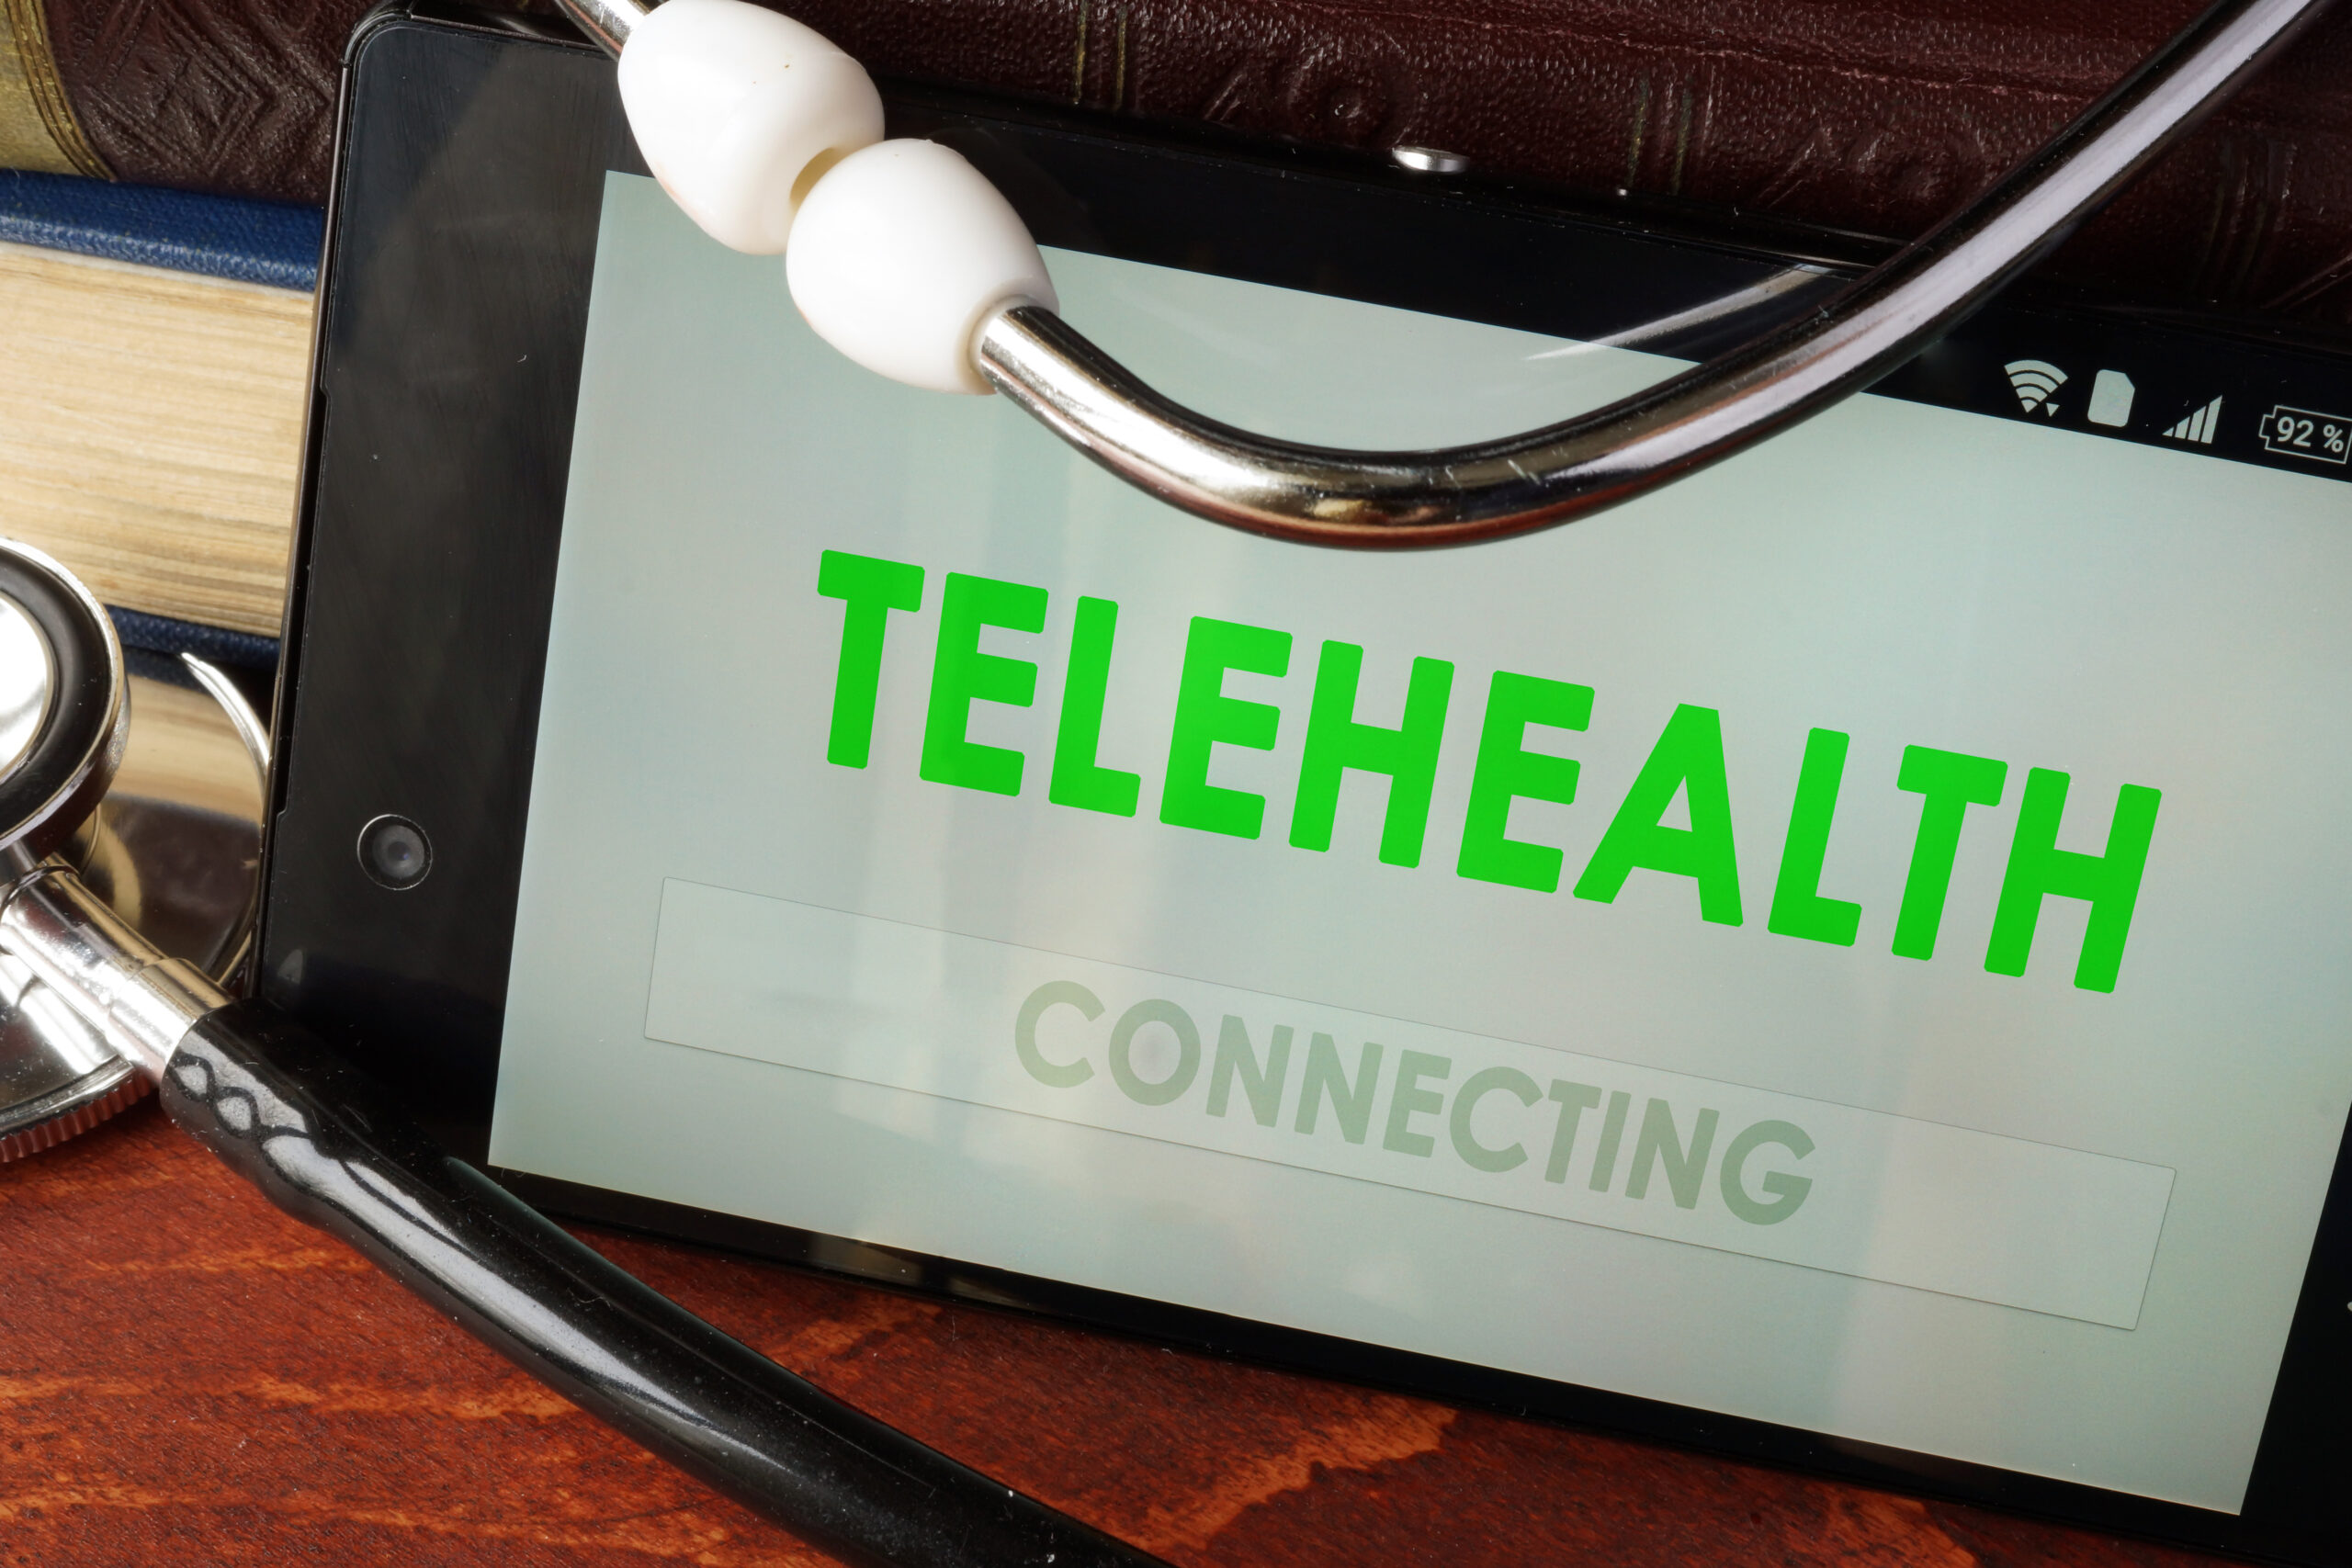 Remote Telepractice Technology is Sparking a Speech Teletherapy Surge